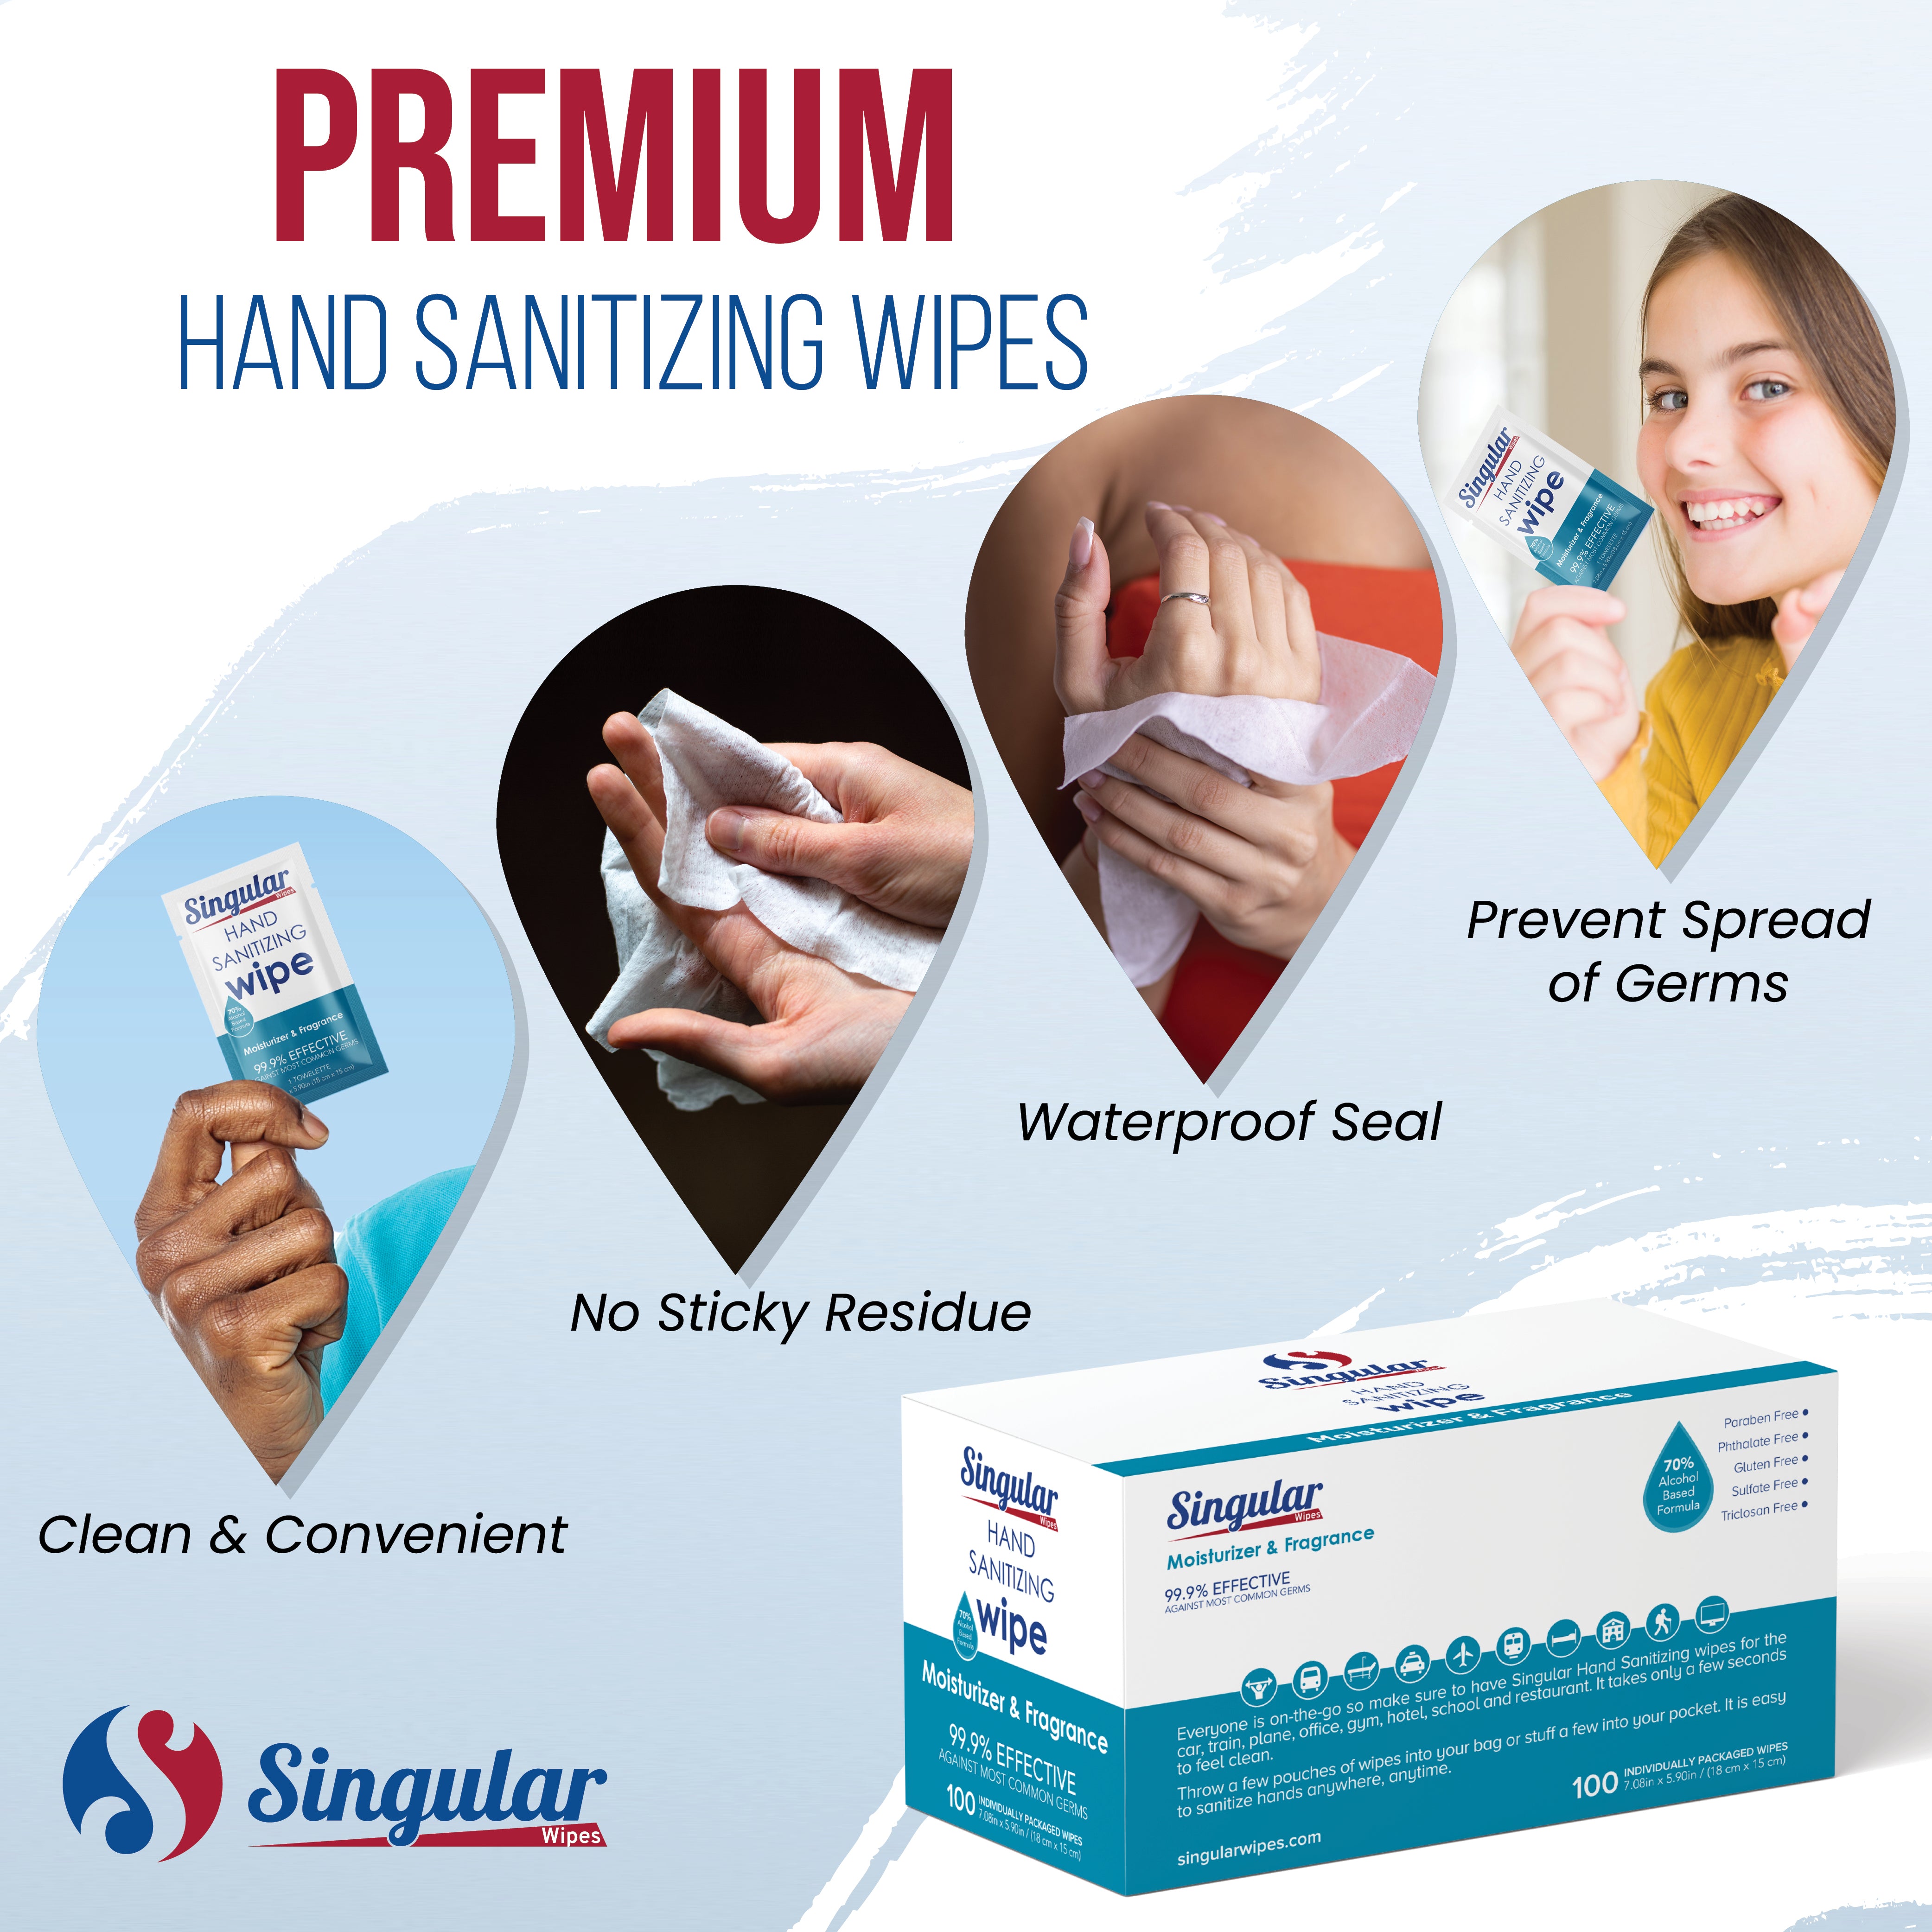 HAND SANITIZING WIPES - 100ct - Individually Packed Premium Hand Sanitizing Wipes for Travel, Home, Office, School, etc. with Fresh Citrus Fragrance and Moisturizer - Made in USA